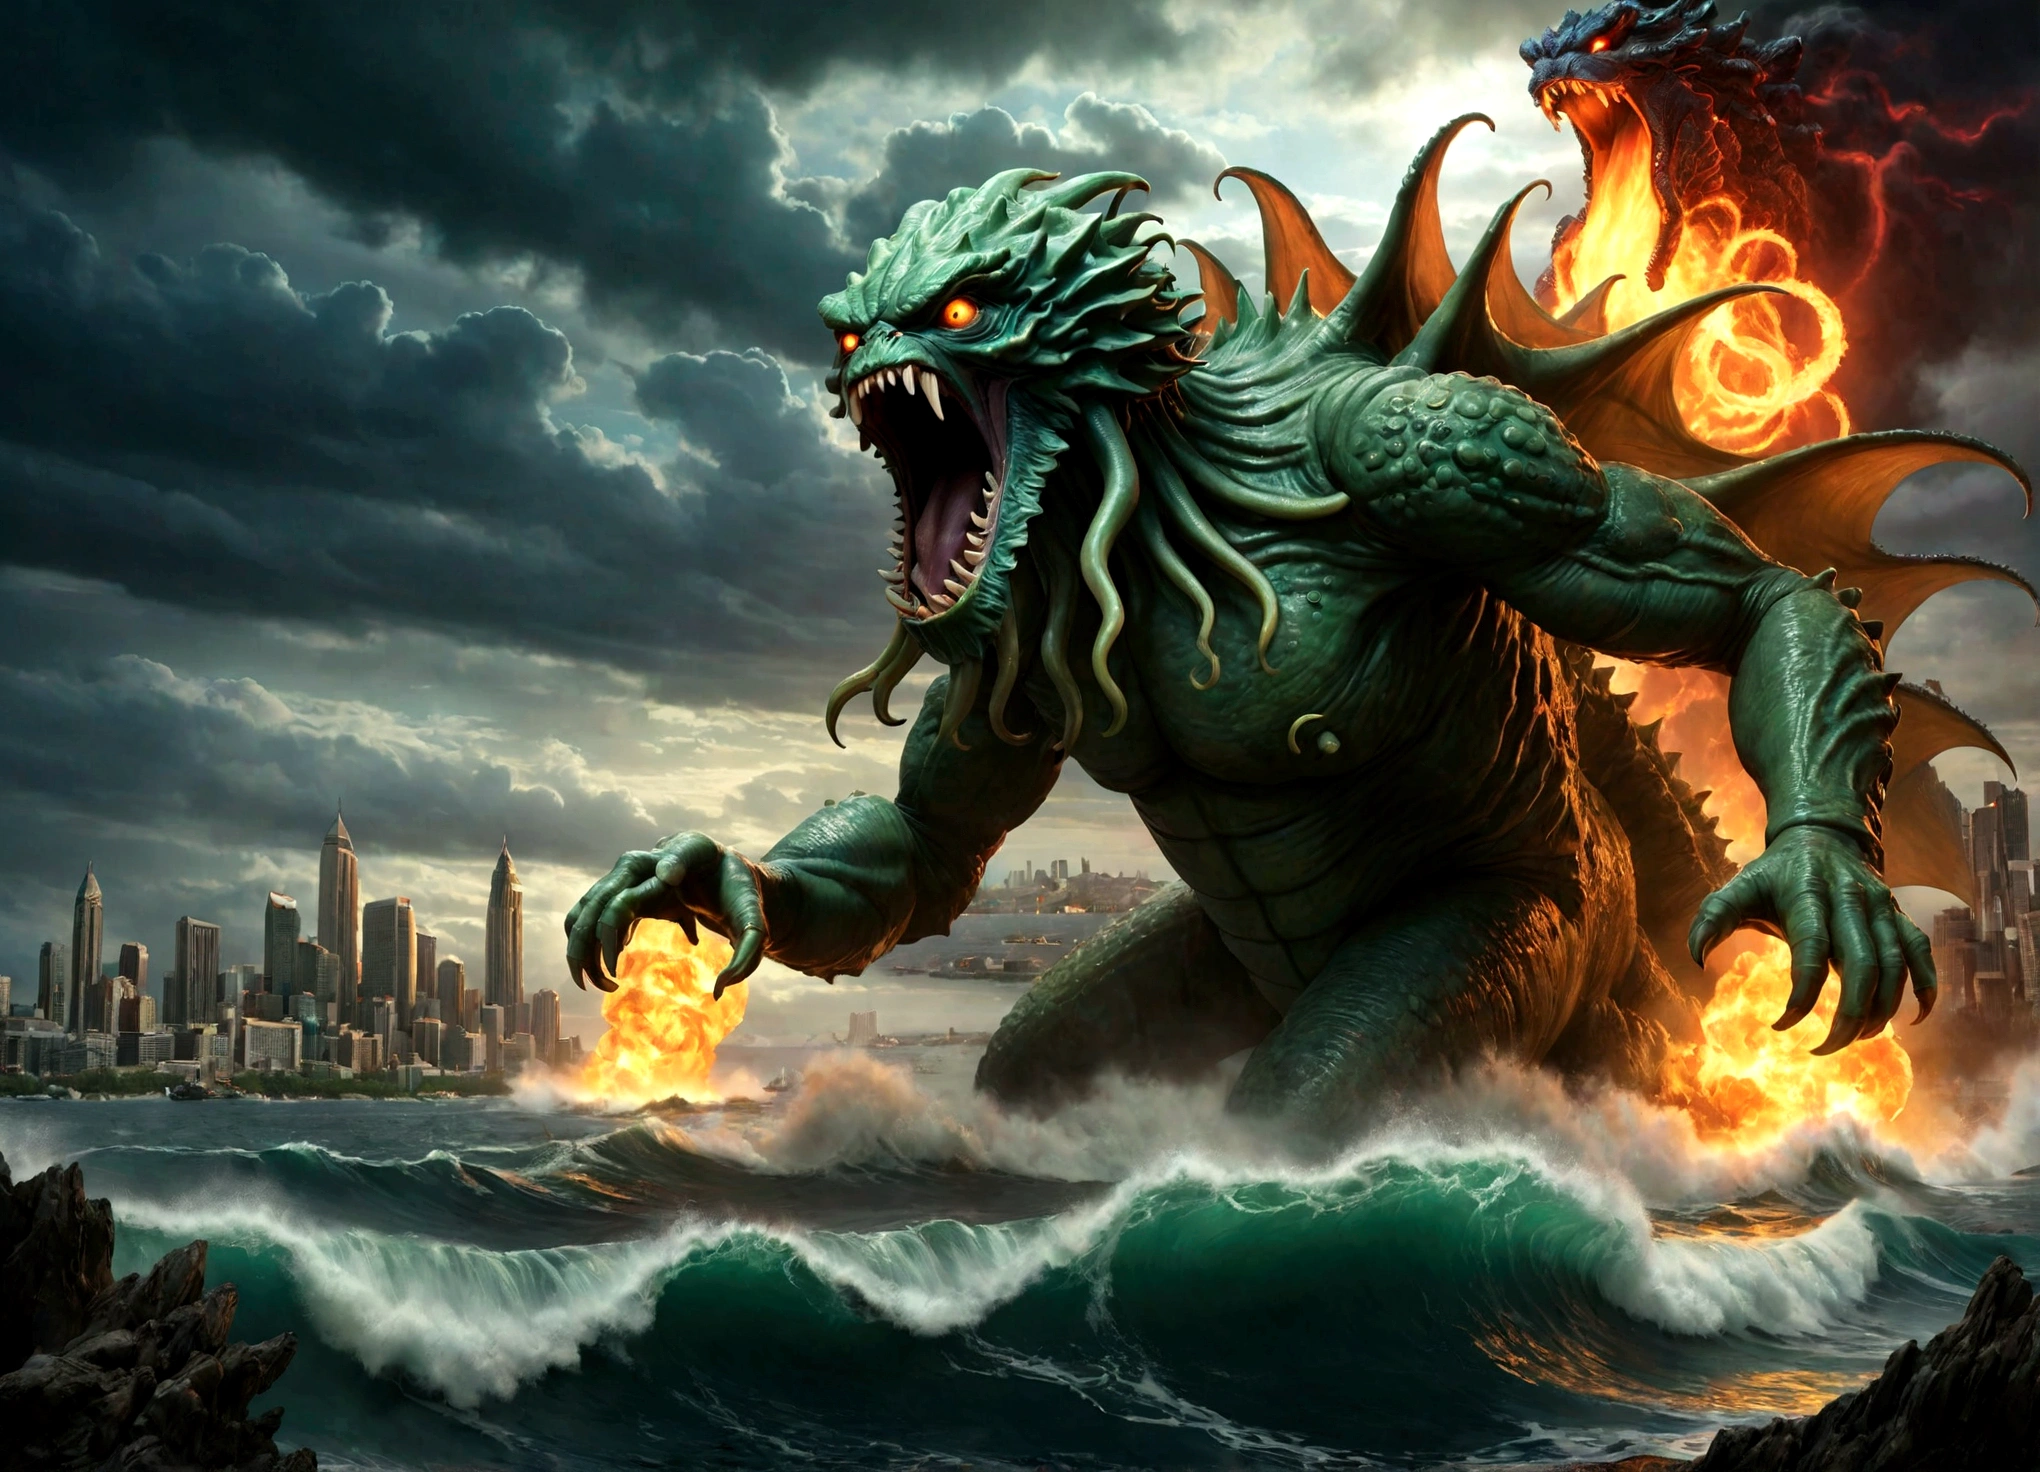 Cthulu is approaching Bangkok, from the other side of the city Godzilla roars and shoots nuclear fire